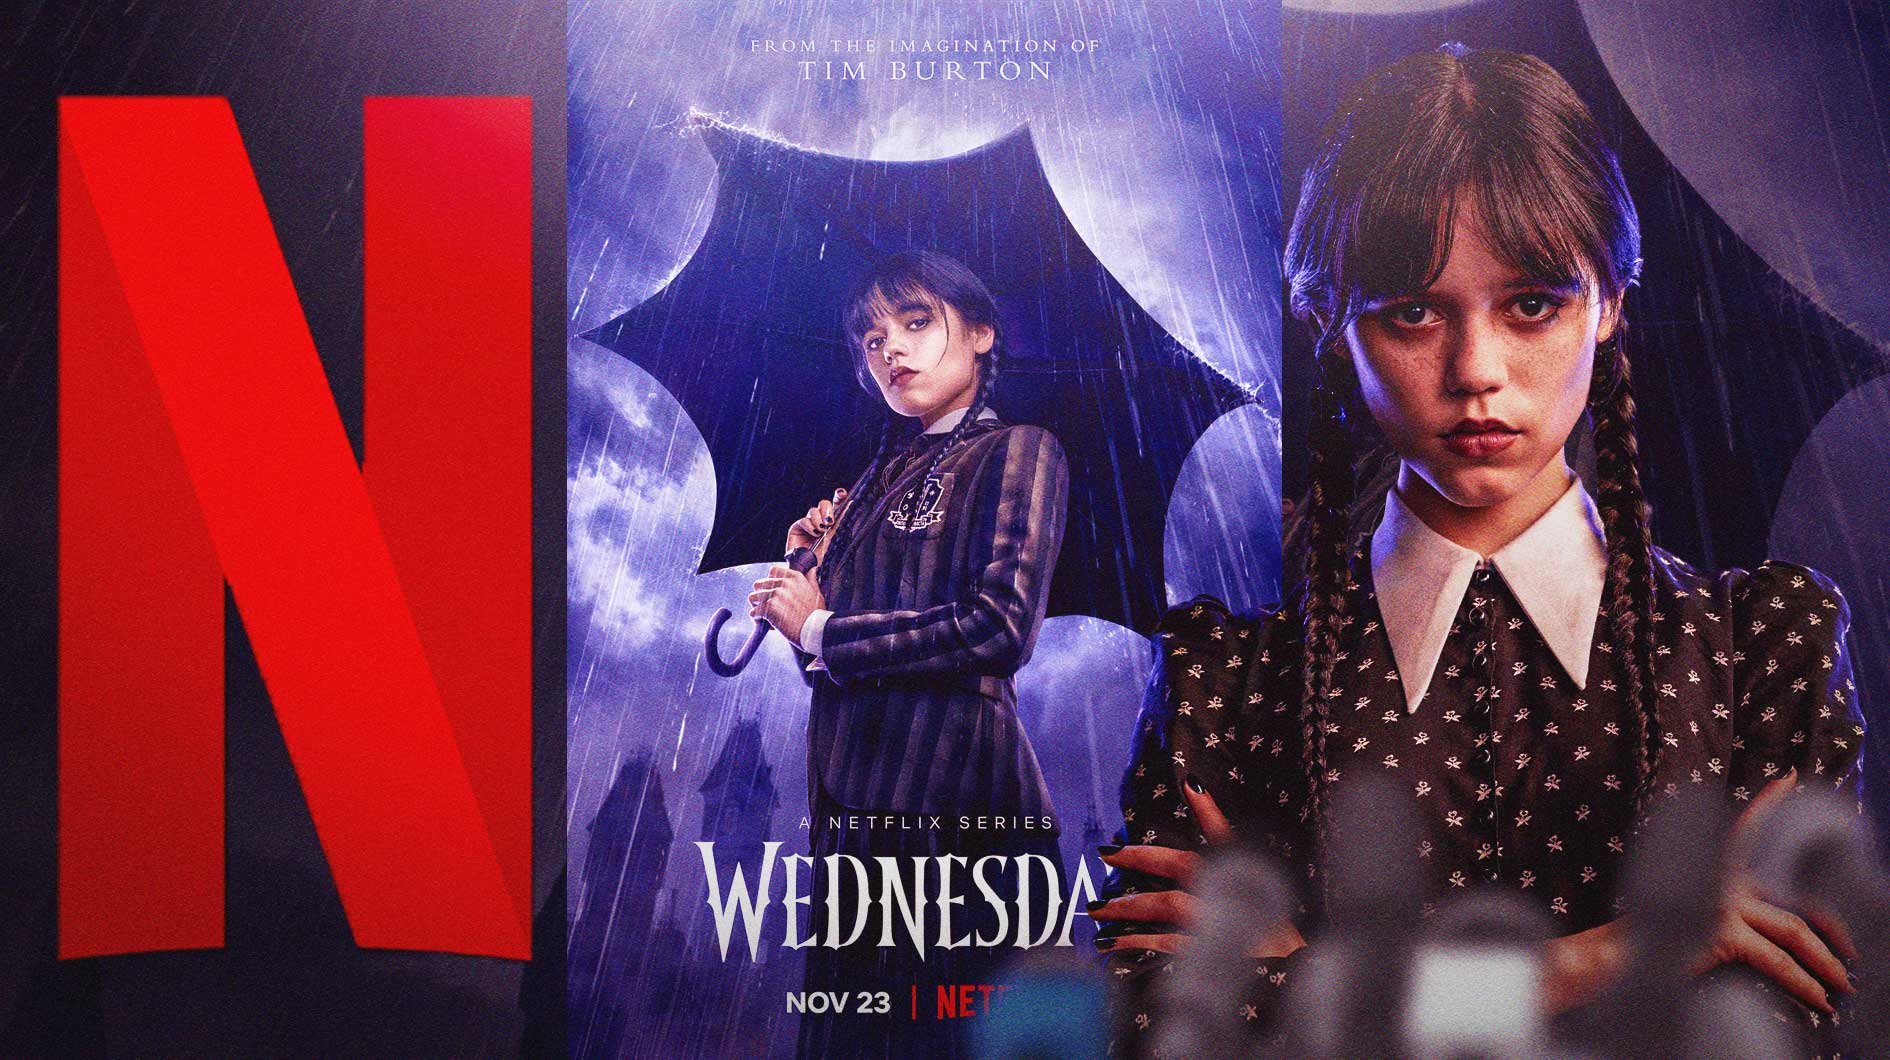 Wednesday Season 2 Gets Exciting Update from Legendary Director